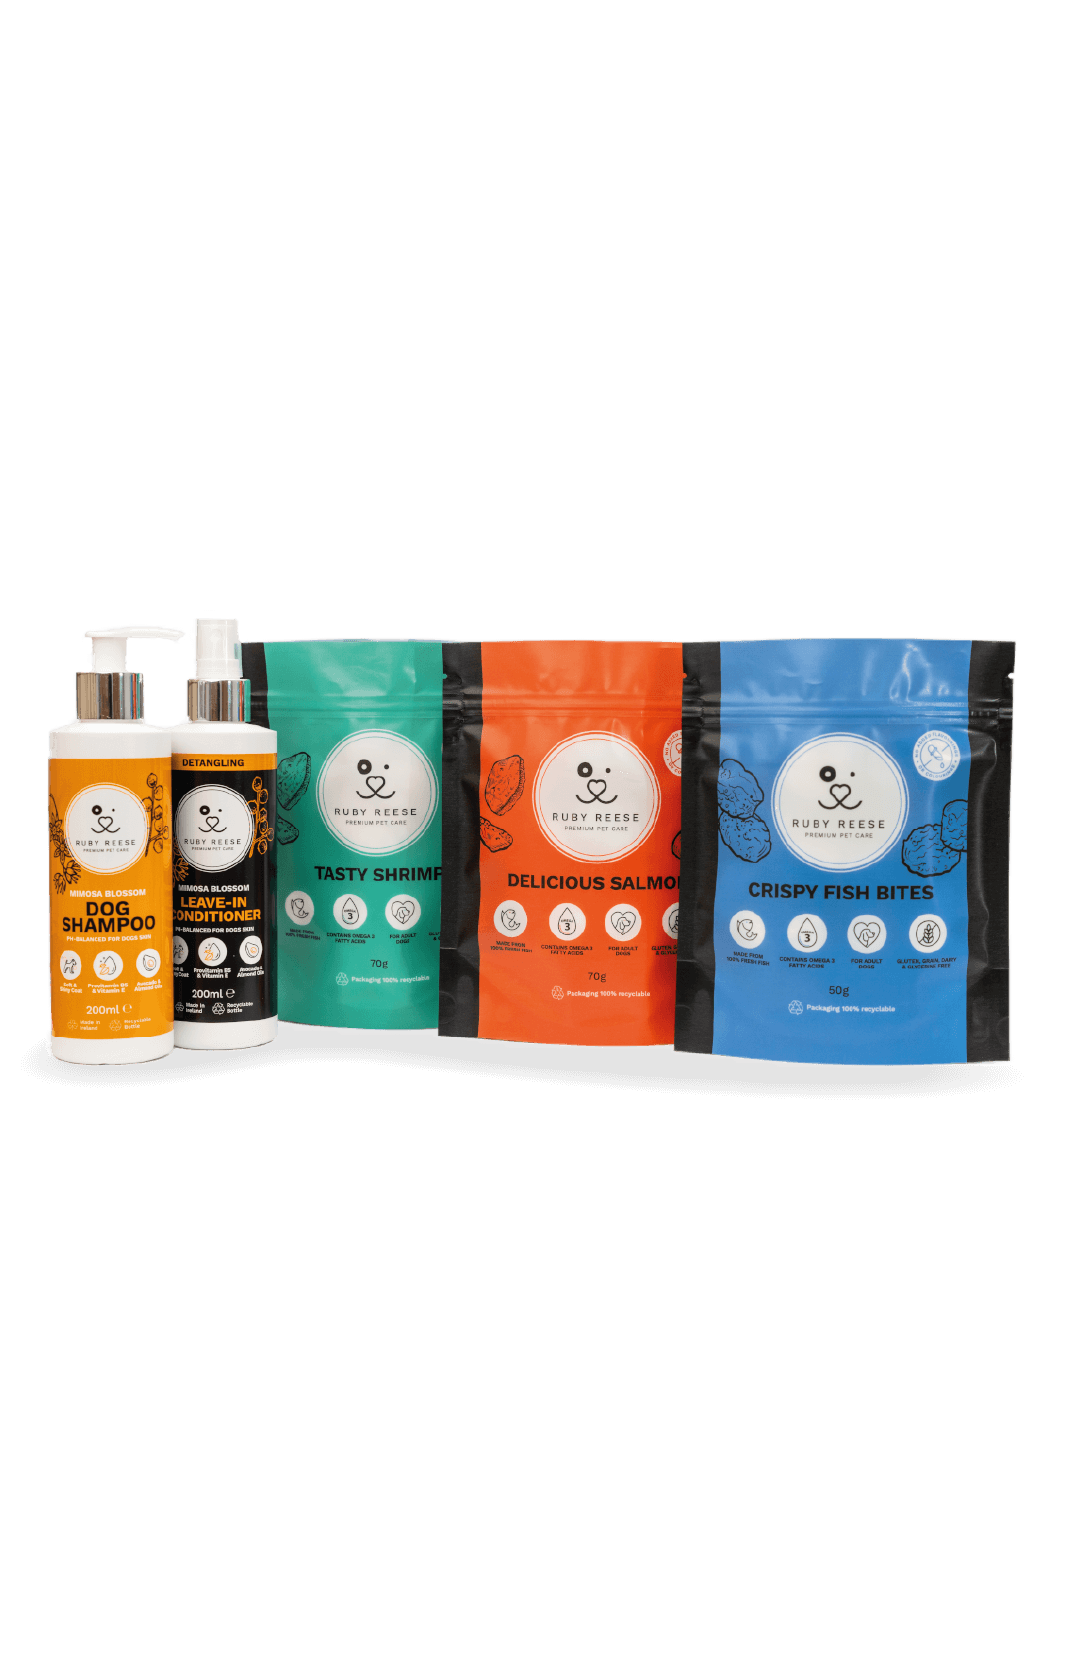 Ruby Reese Sampler Set. Showing two bottles of grooming products for dogs and three pouches of natural dog treats.